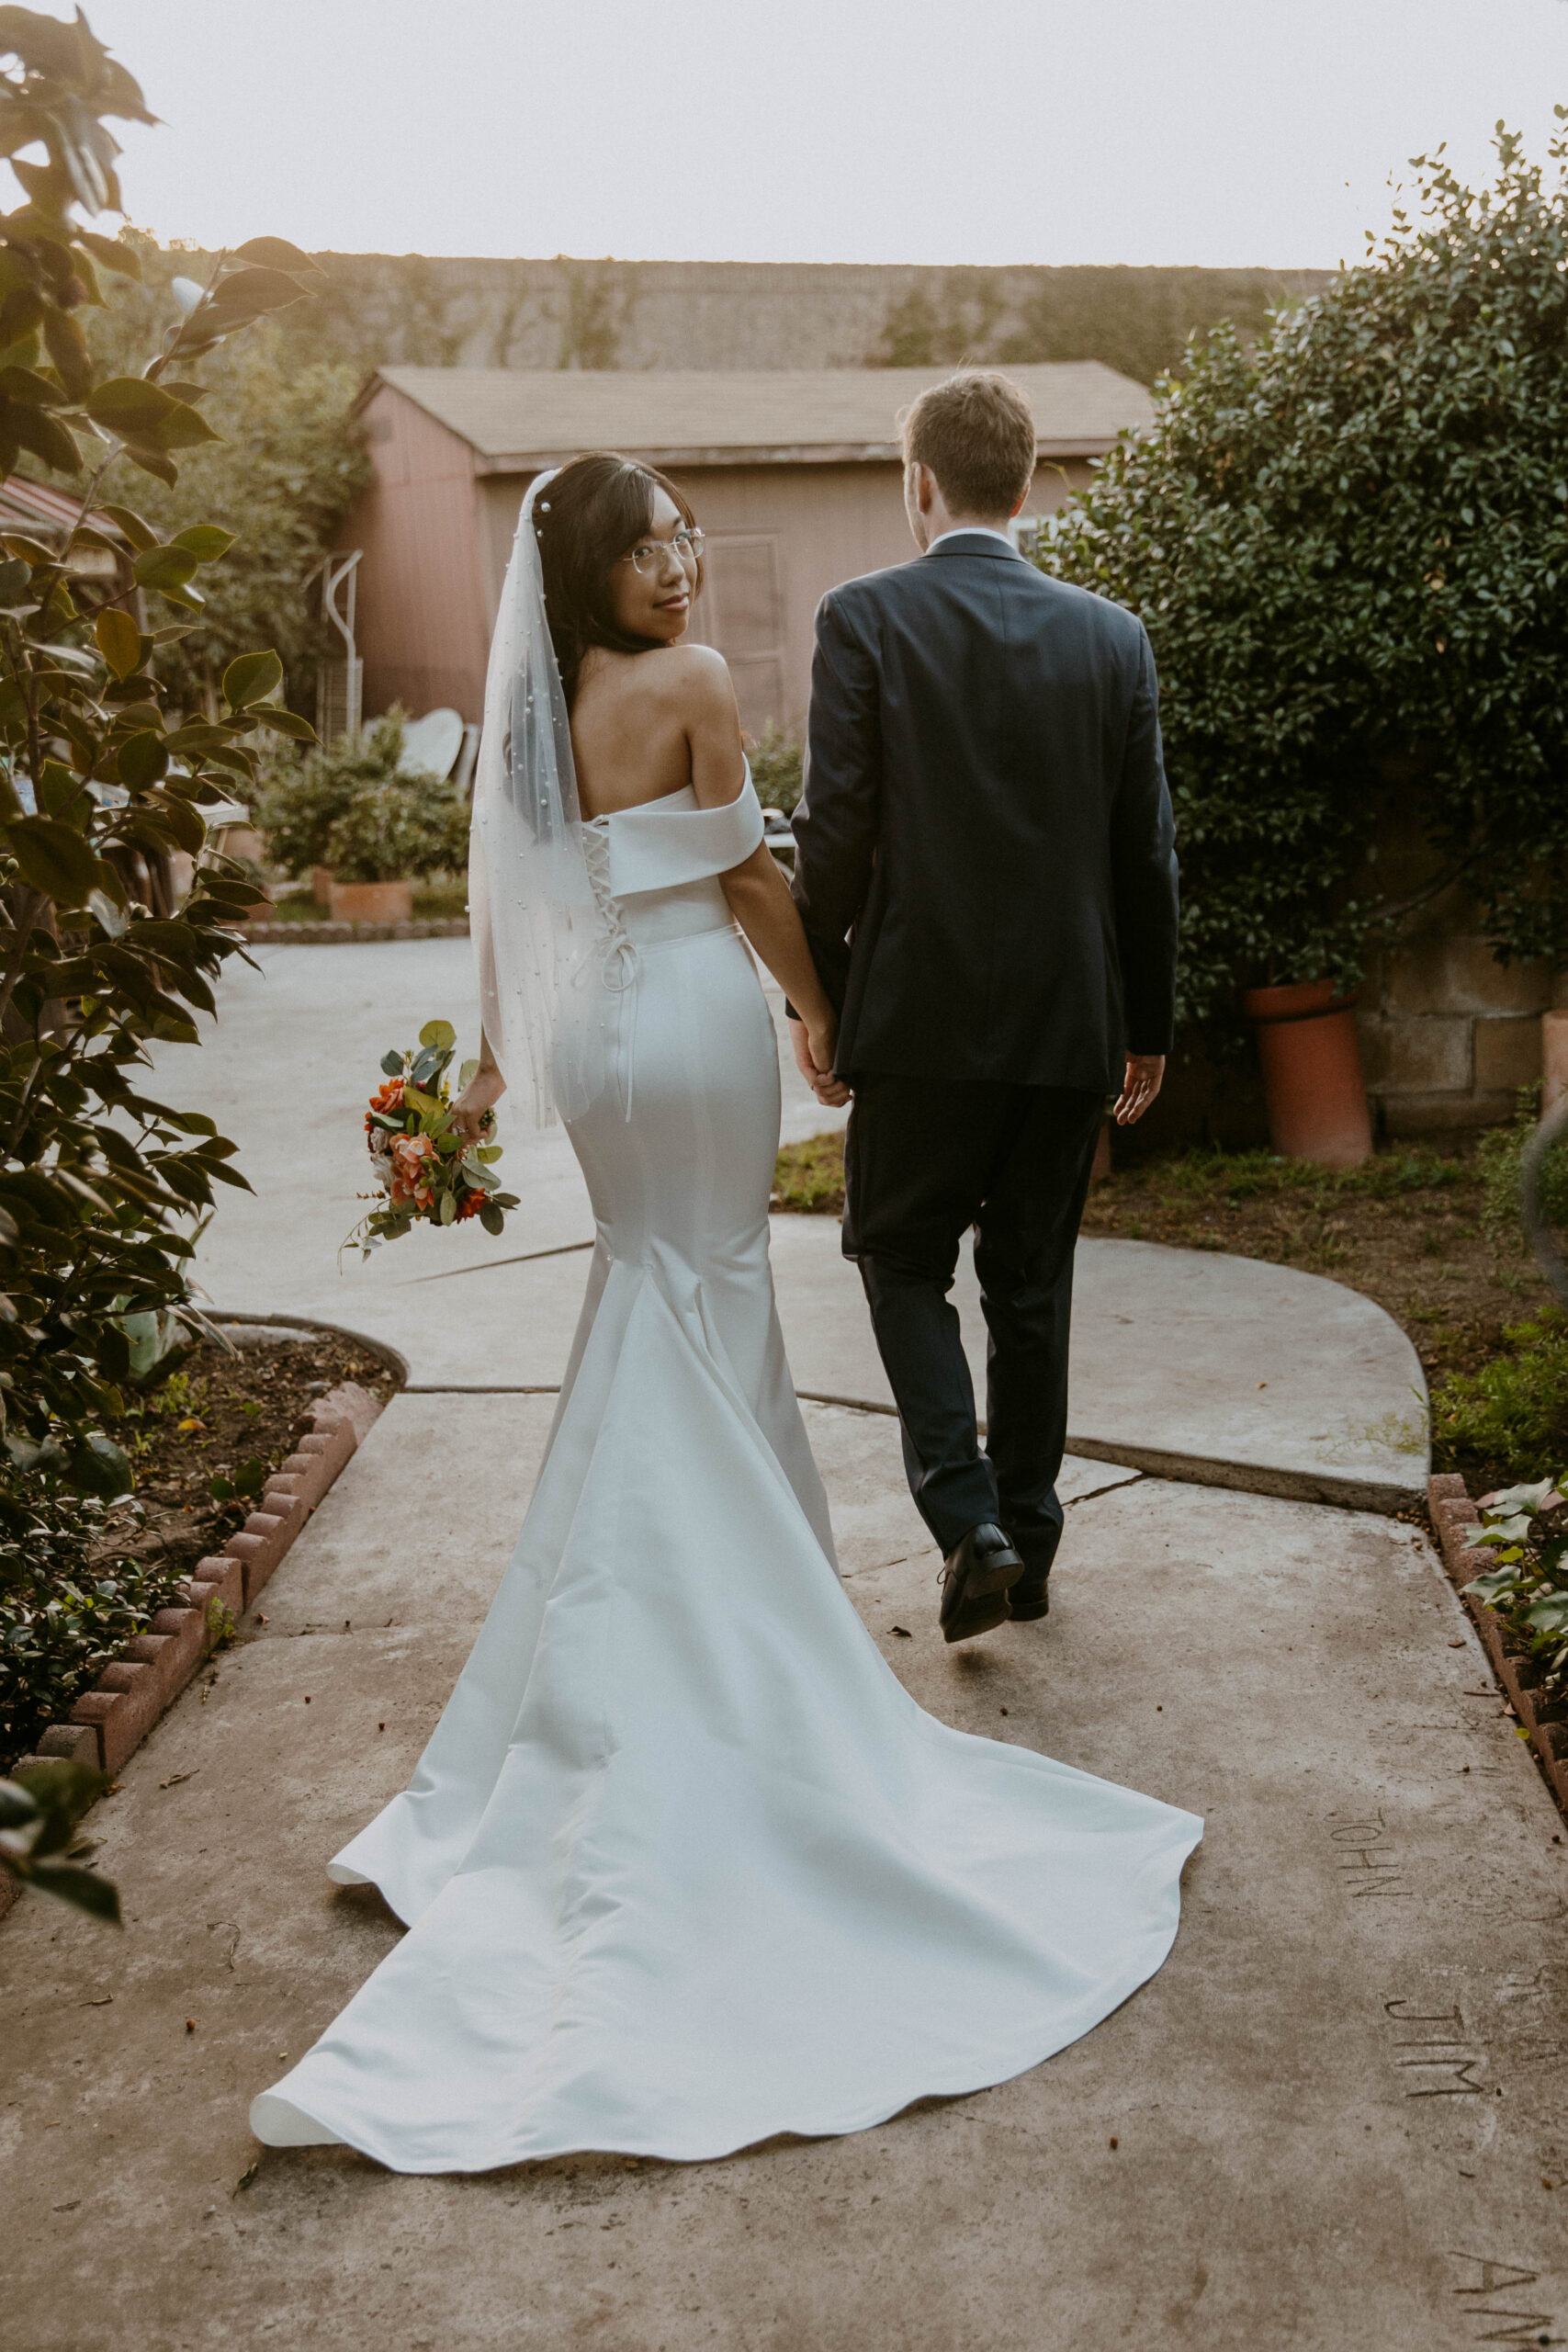 A bride in a white gown with a veil and a groom in a suit walking hand in hand away from the camera.